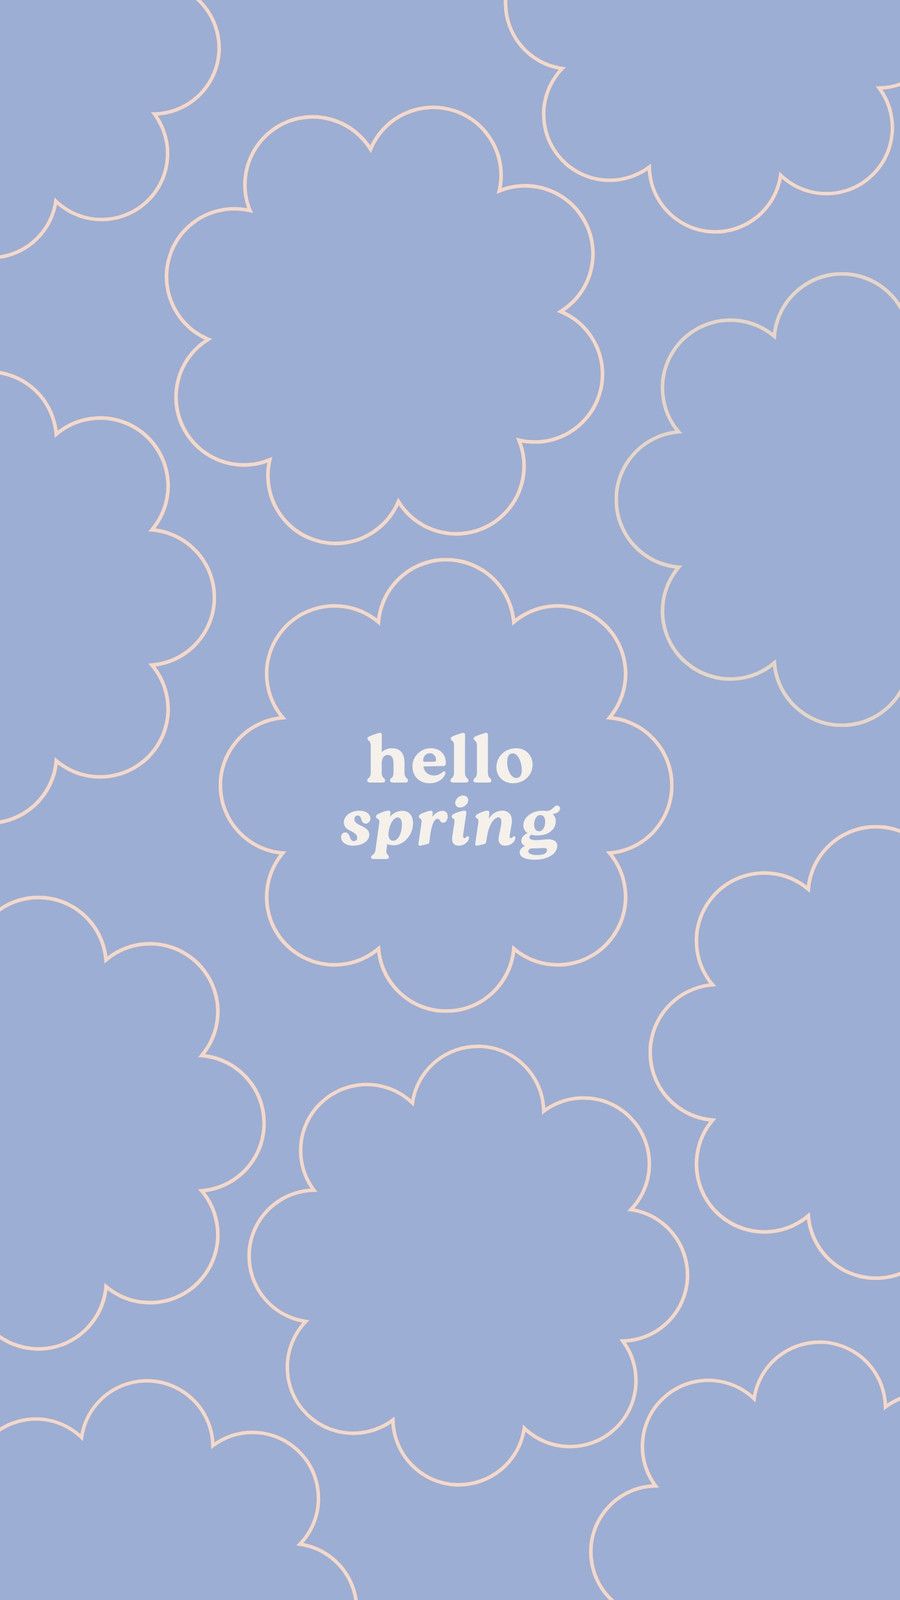 A blue background with white clouds and the words hello spring - Bright